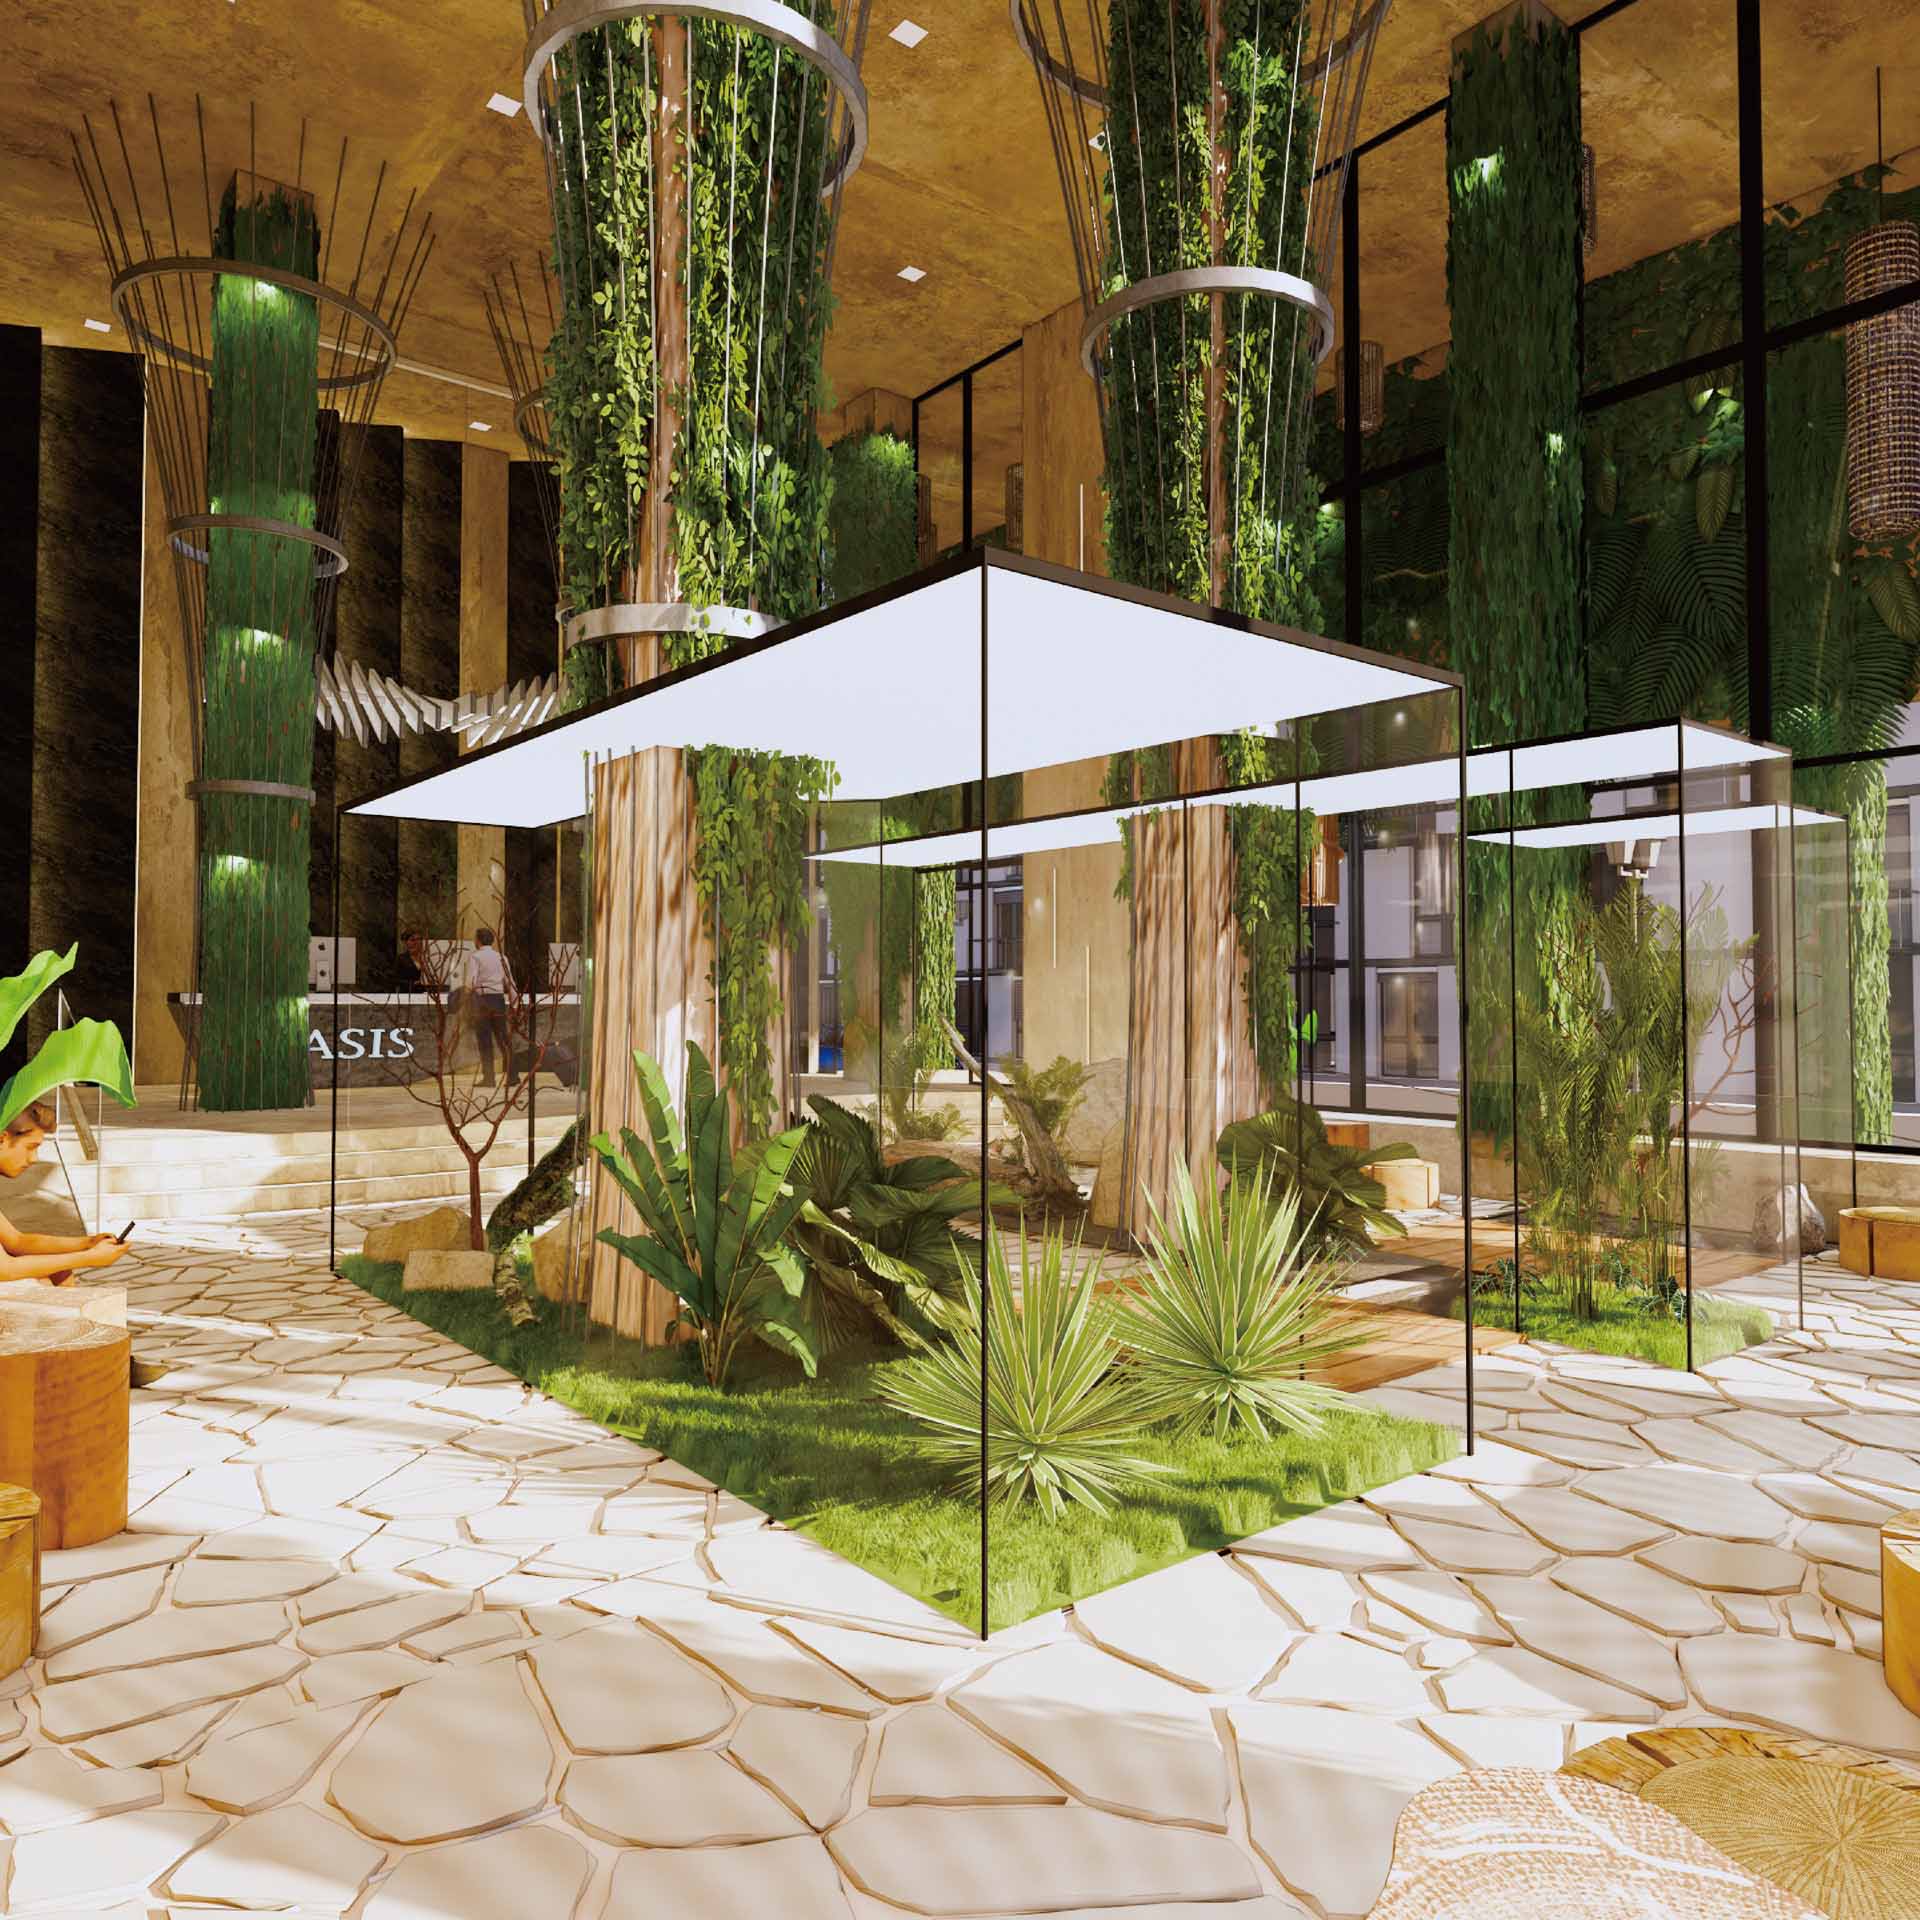 Oasis Sustainable Hotel by Liyang Chen and Zhengyan Jiang